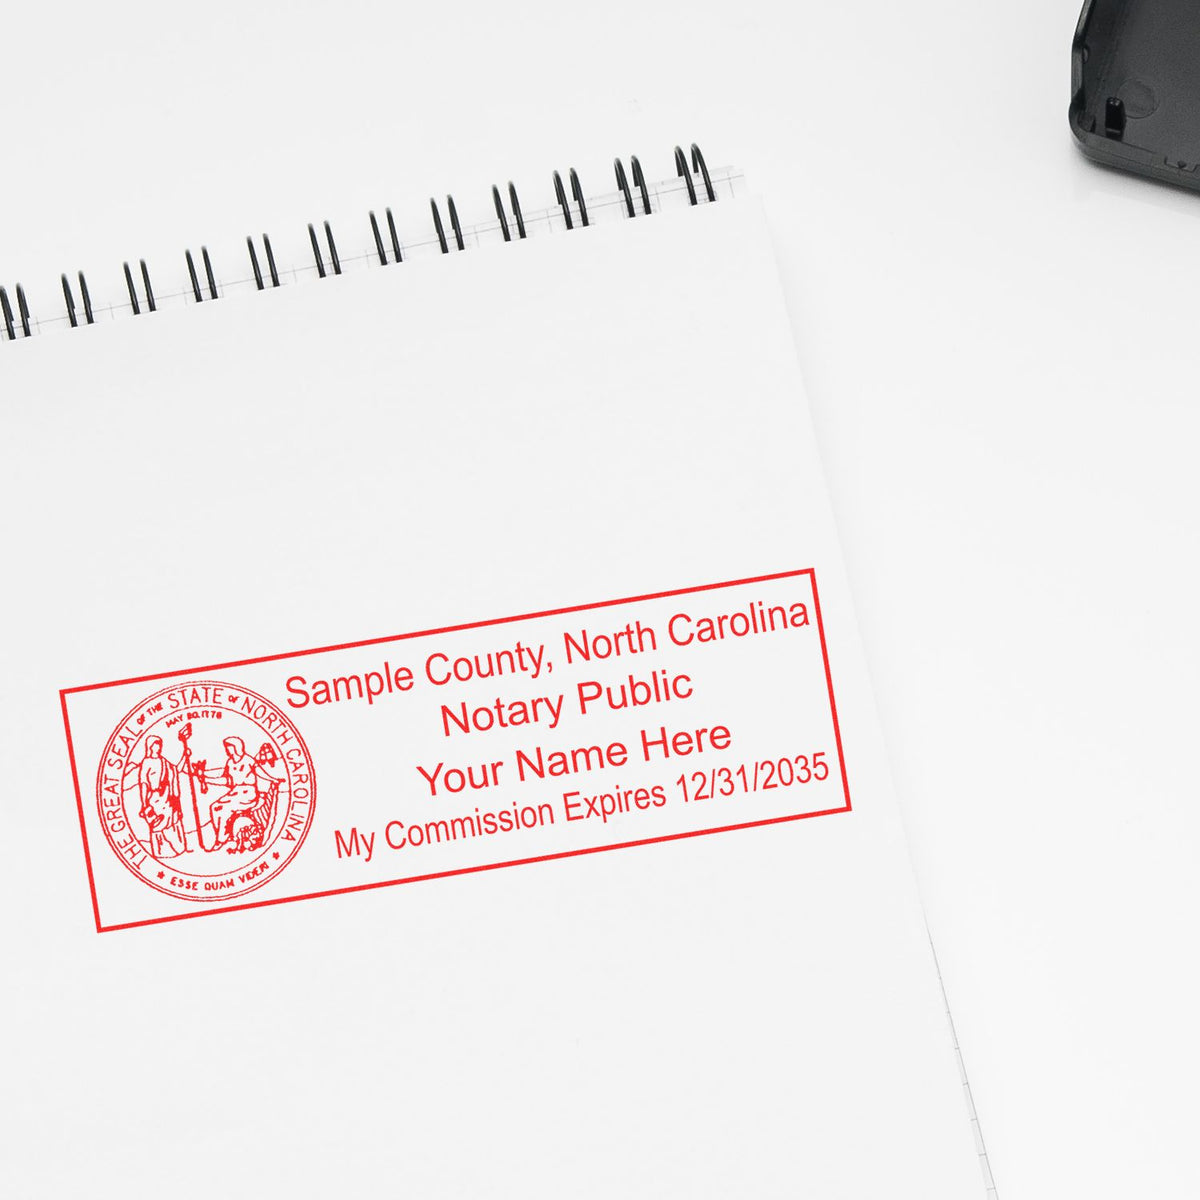 An alternative view of the MaxLight Premium Pre-Inked North Carolina State Seal Notarial Stamp stamped on a sheet of paper showing the image in use